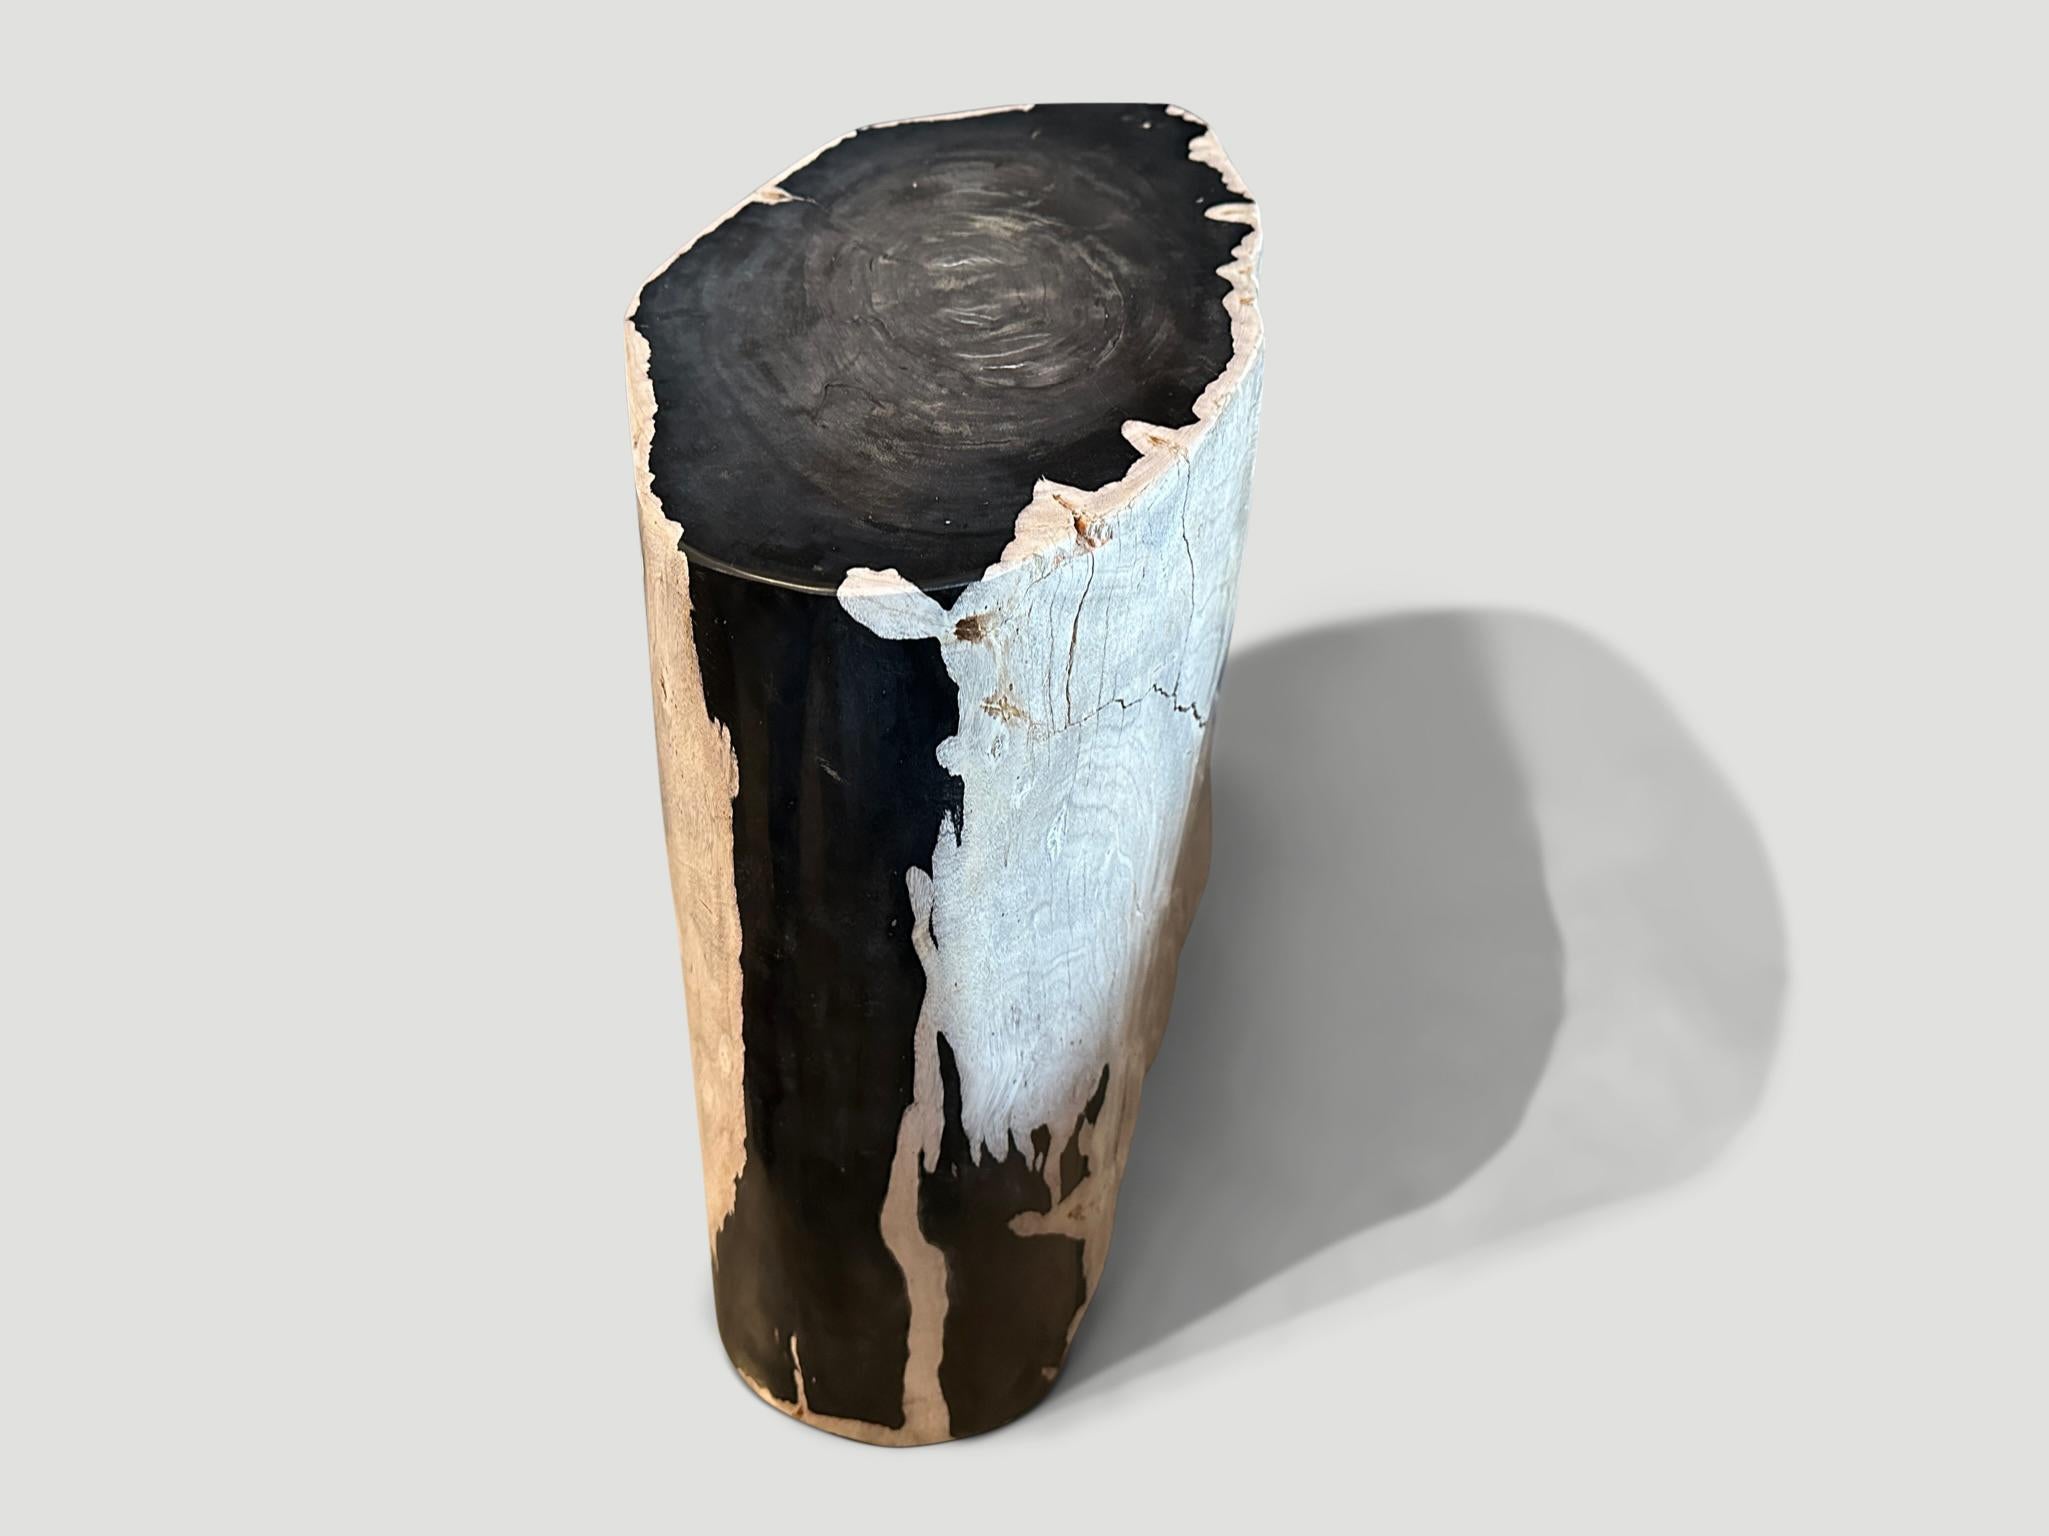 Impressive beautiful contrasting markings on this high quality ancient petrified wood side table. It’s fascinating how Mother Nature produces these stunning 40 million year old petrified teak logs with such contrasting colors and natural patterns